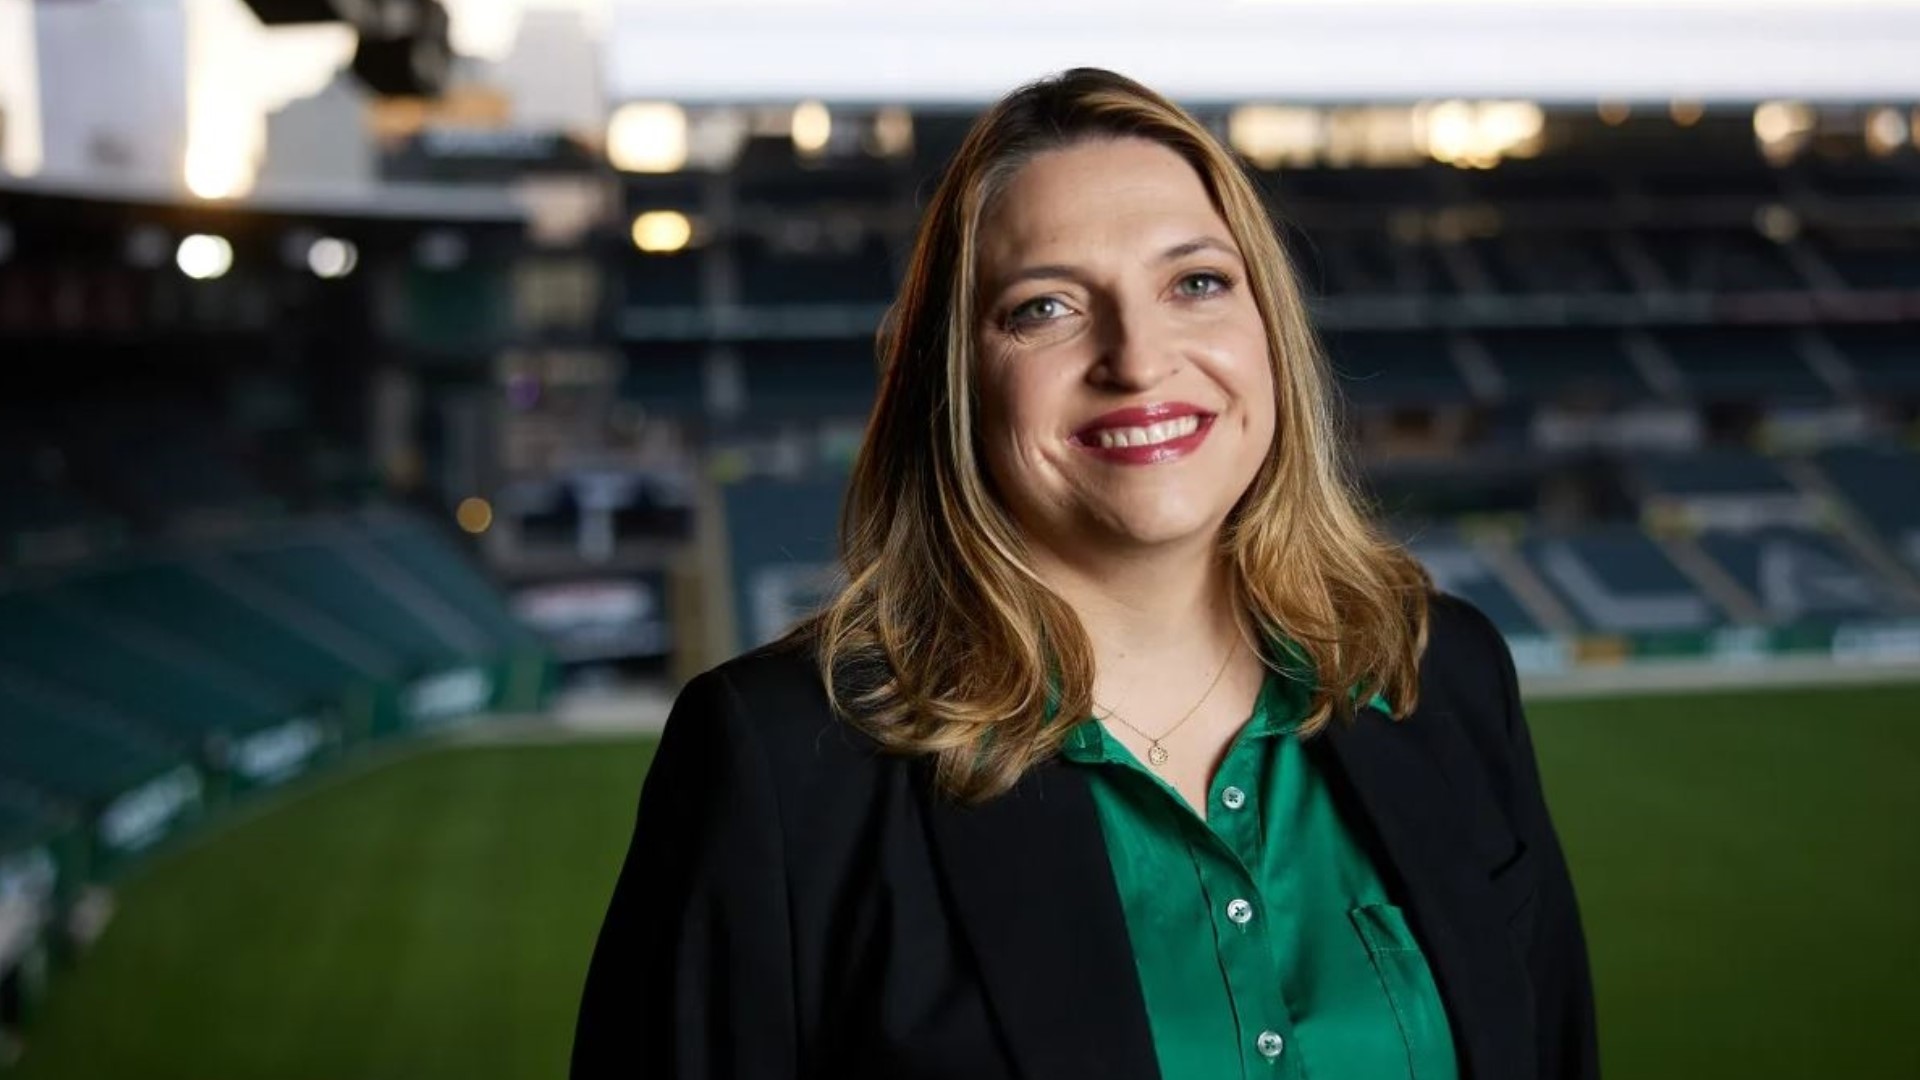 The clubs' new chief executive officer is one of five women to hold the position of CEO or president in Major League Soccer.